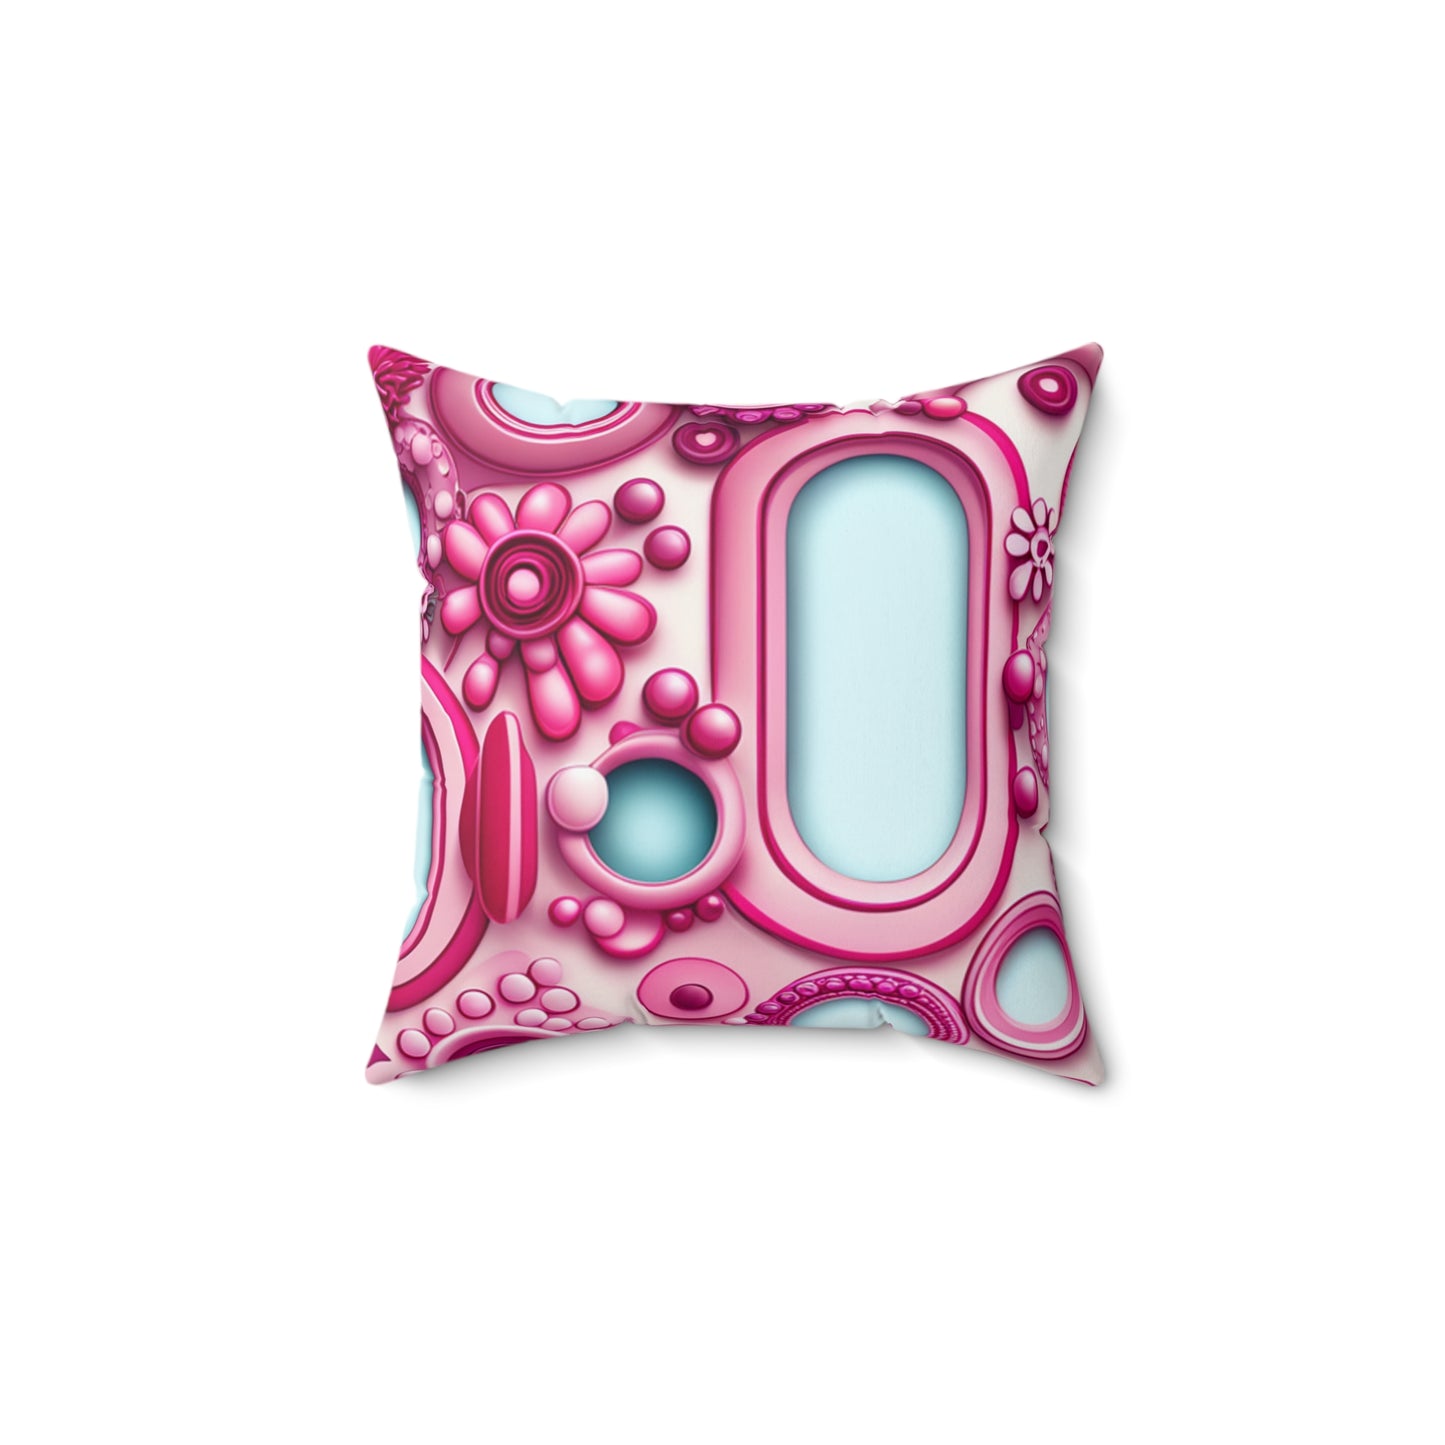 Pink Design Themed Square Pillow